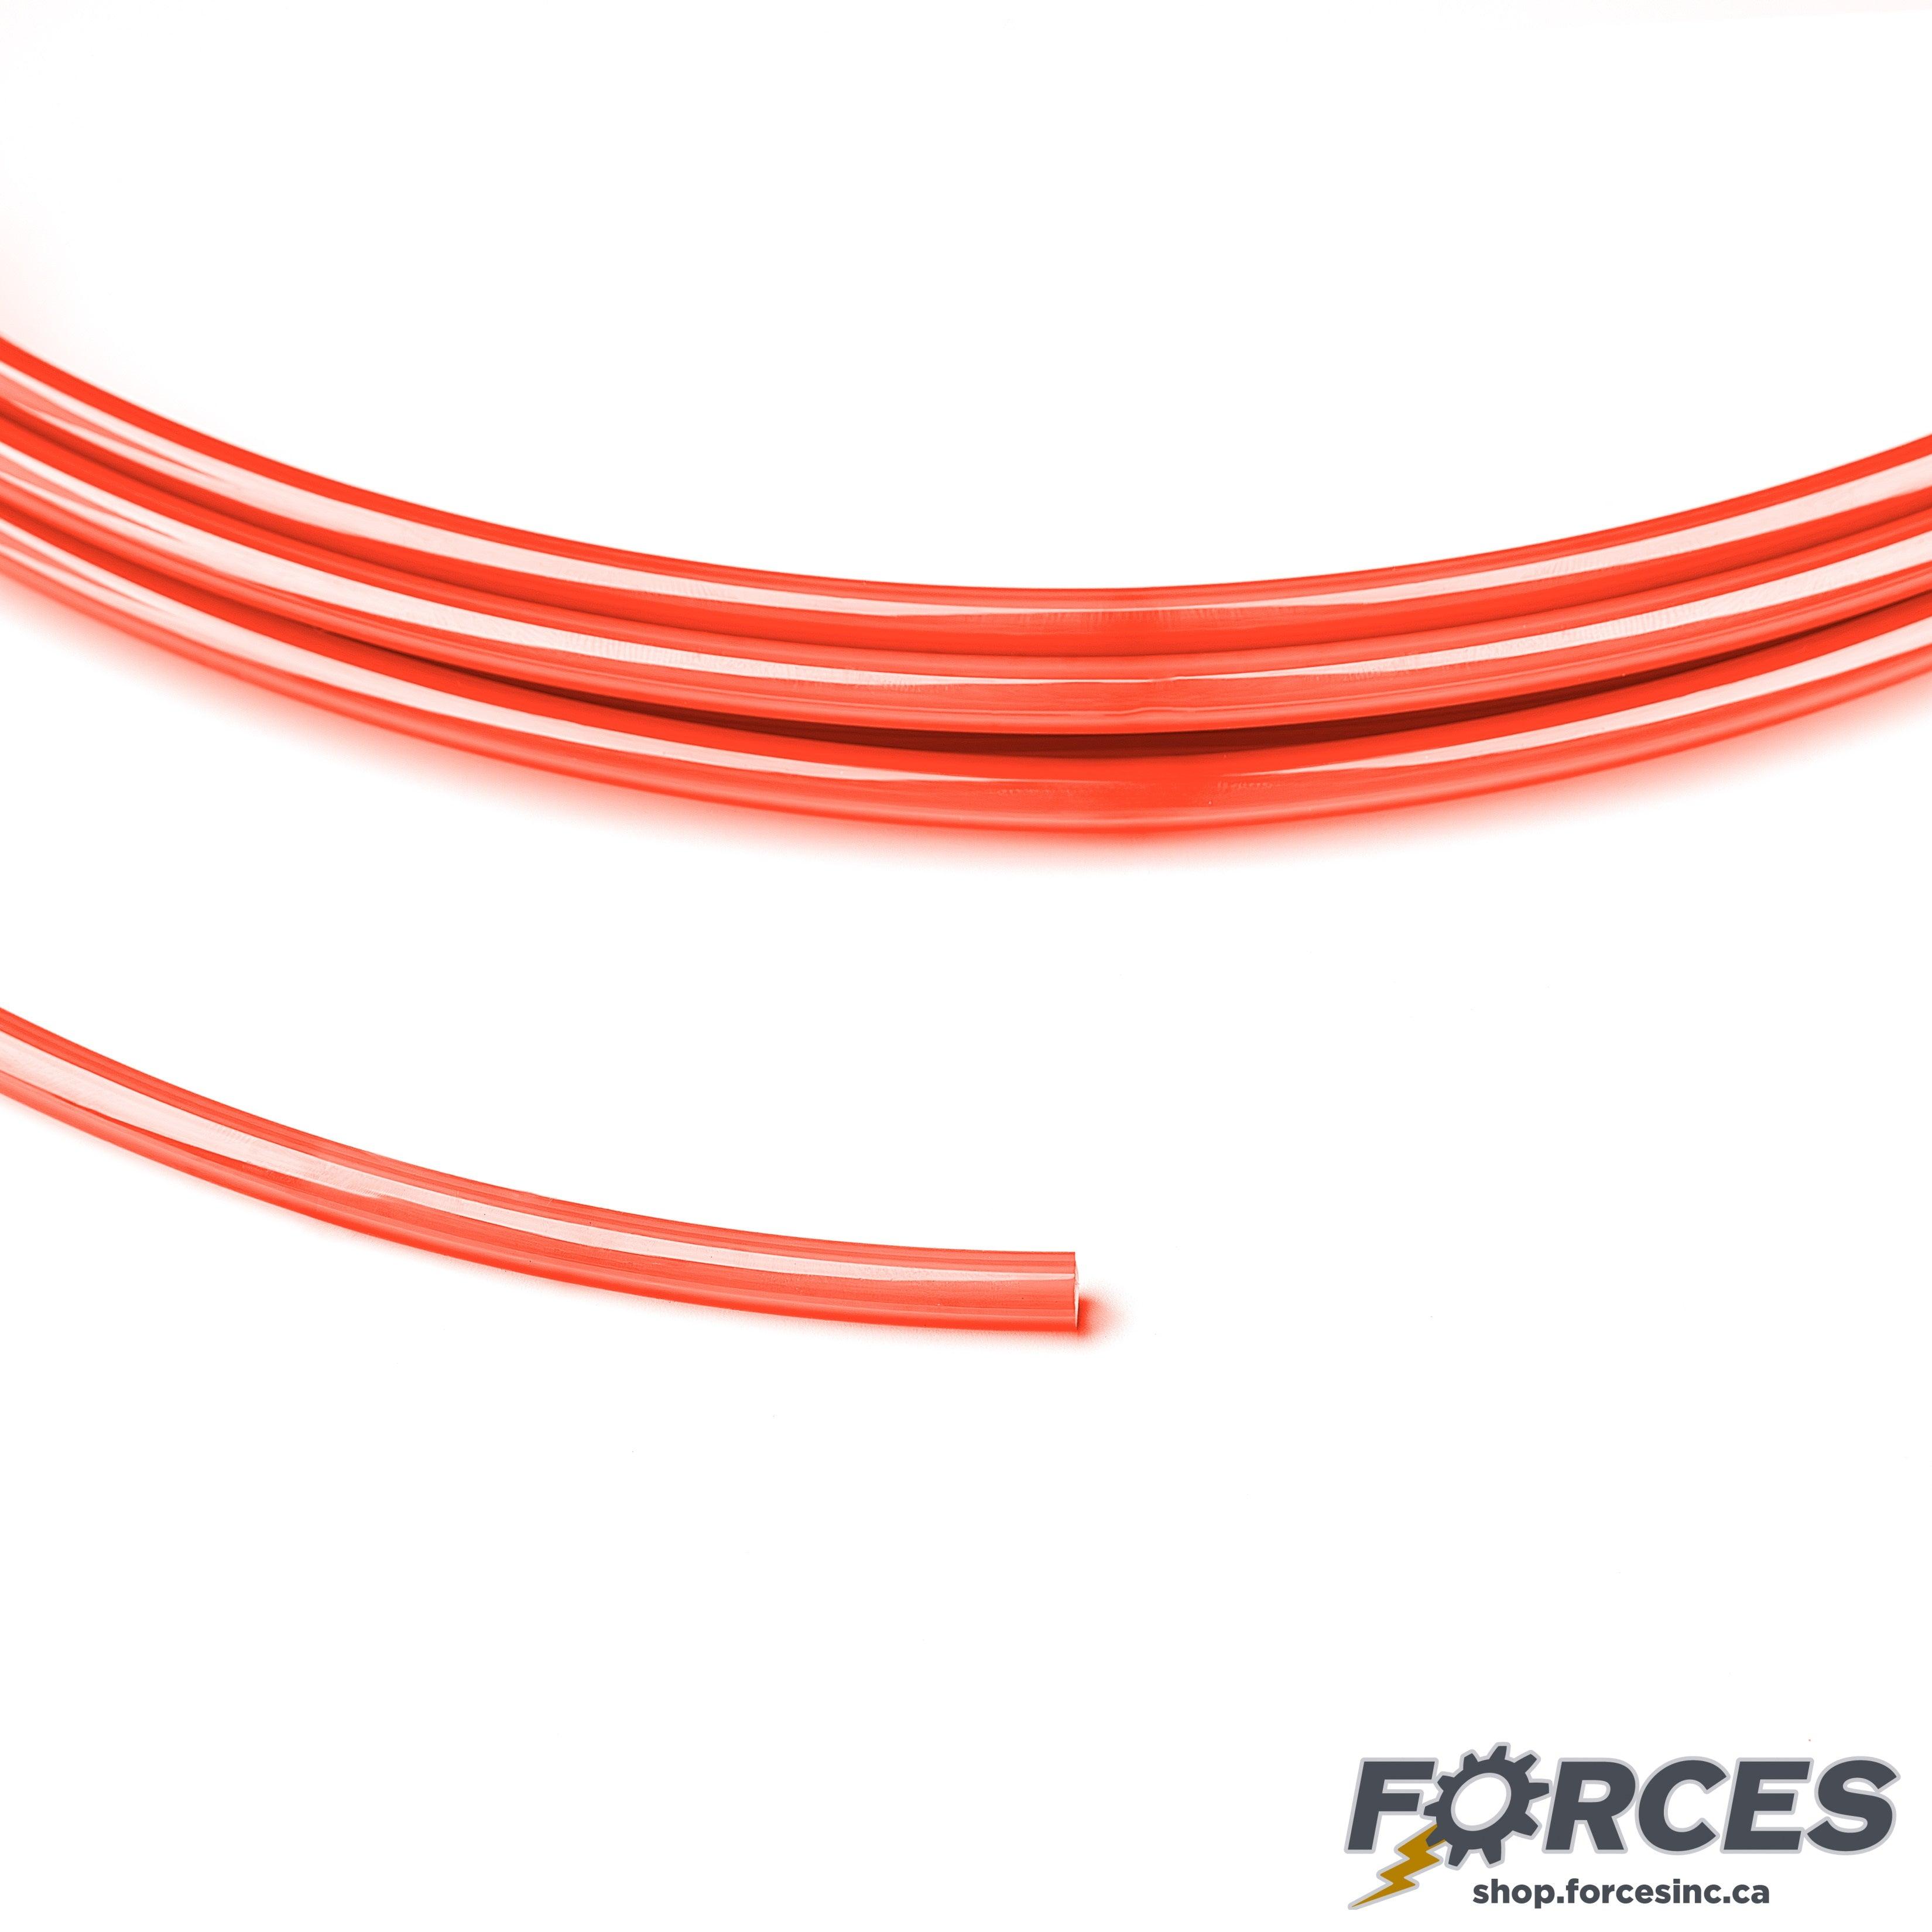 Pneumatic Air Tubing 3mm x 2mm Red Polyurethane - 660ft - Forces Inc